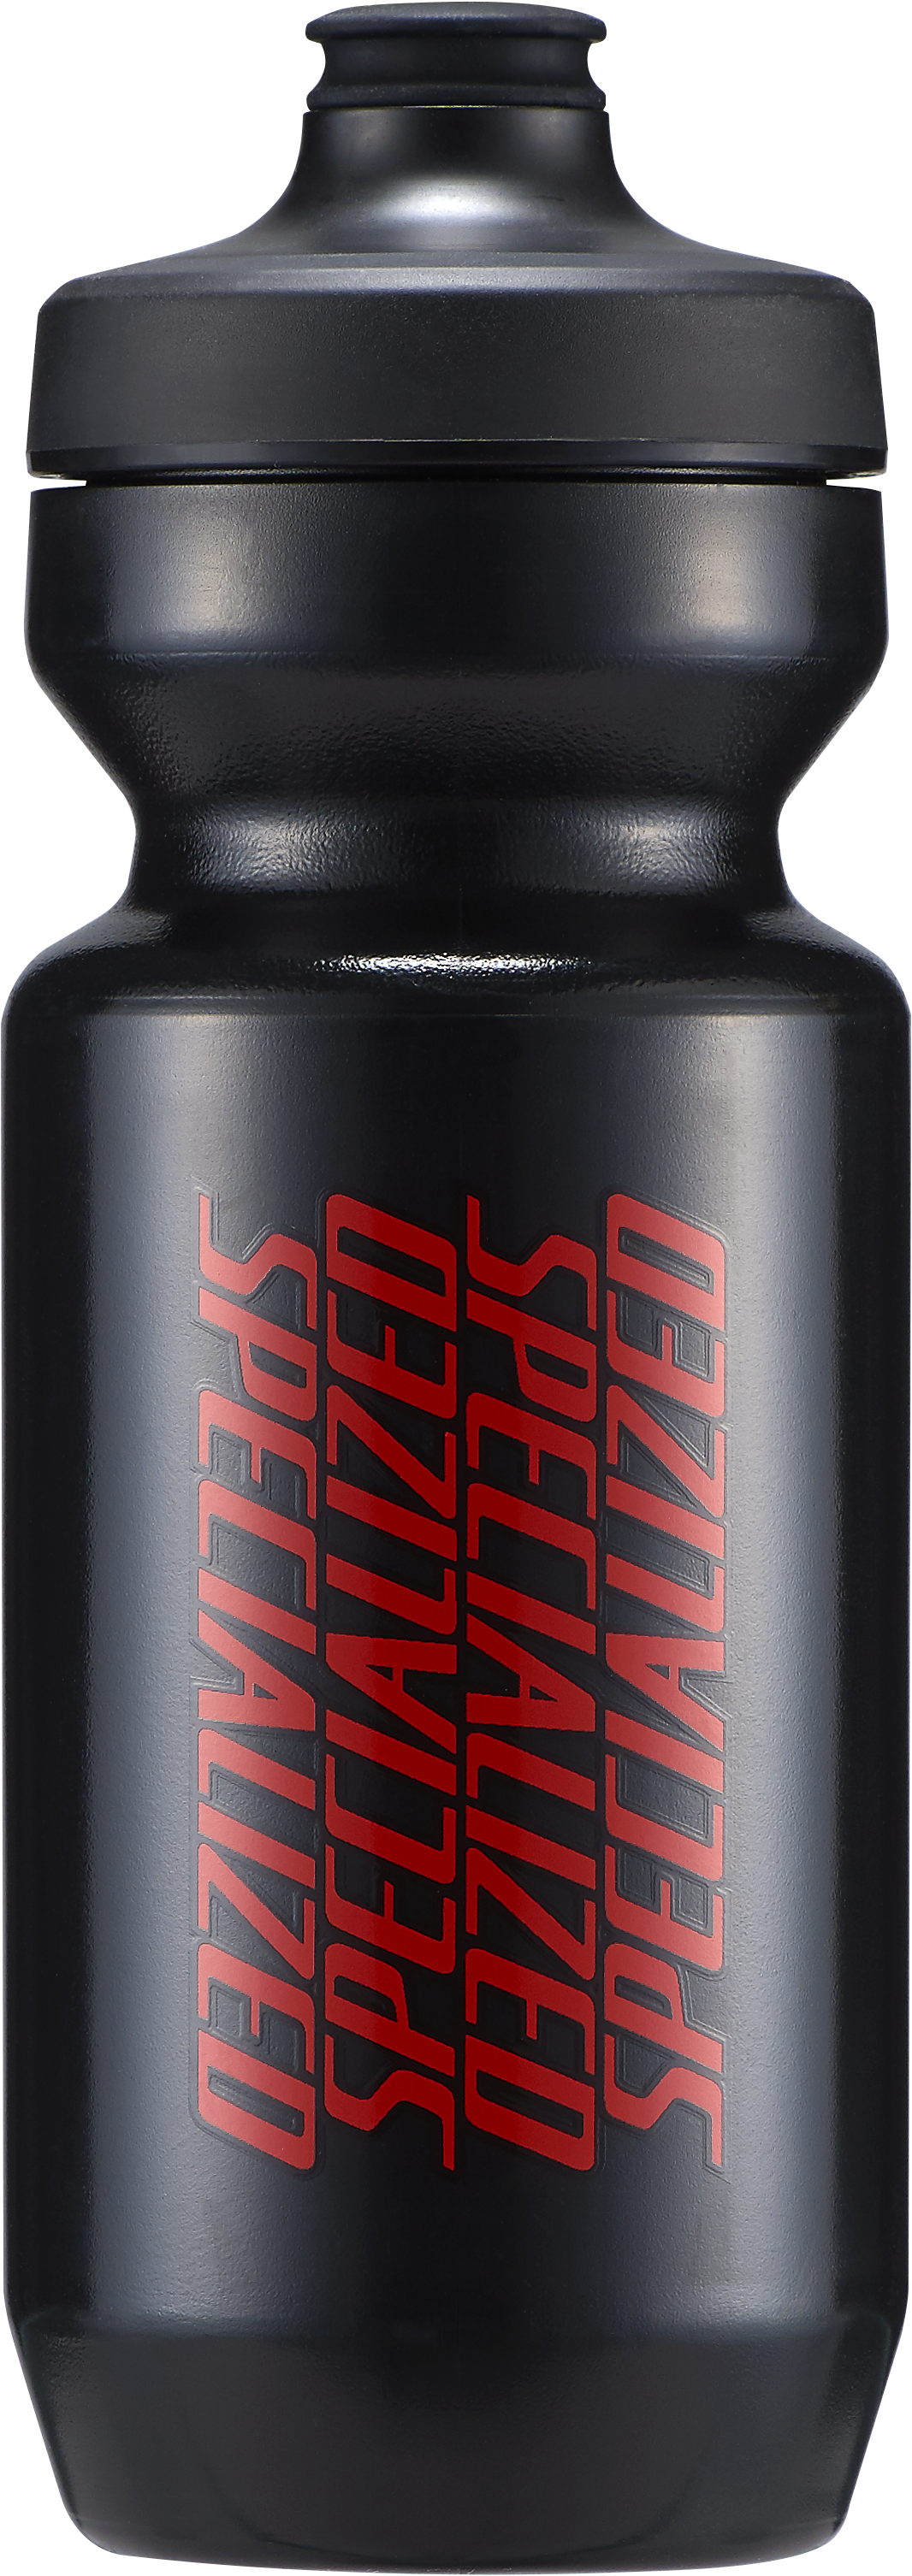 Specialized Special Eyes Purist MoFlo "Limited Edition" 650ml Drikkedunk - Sort/Rød